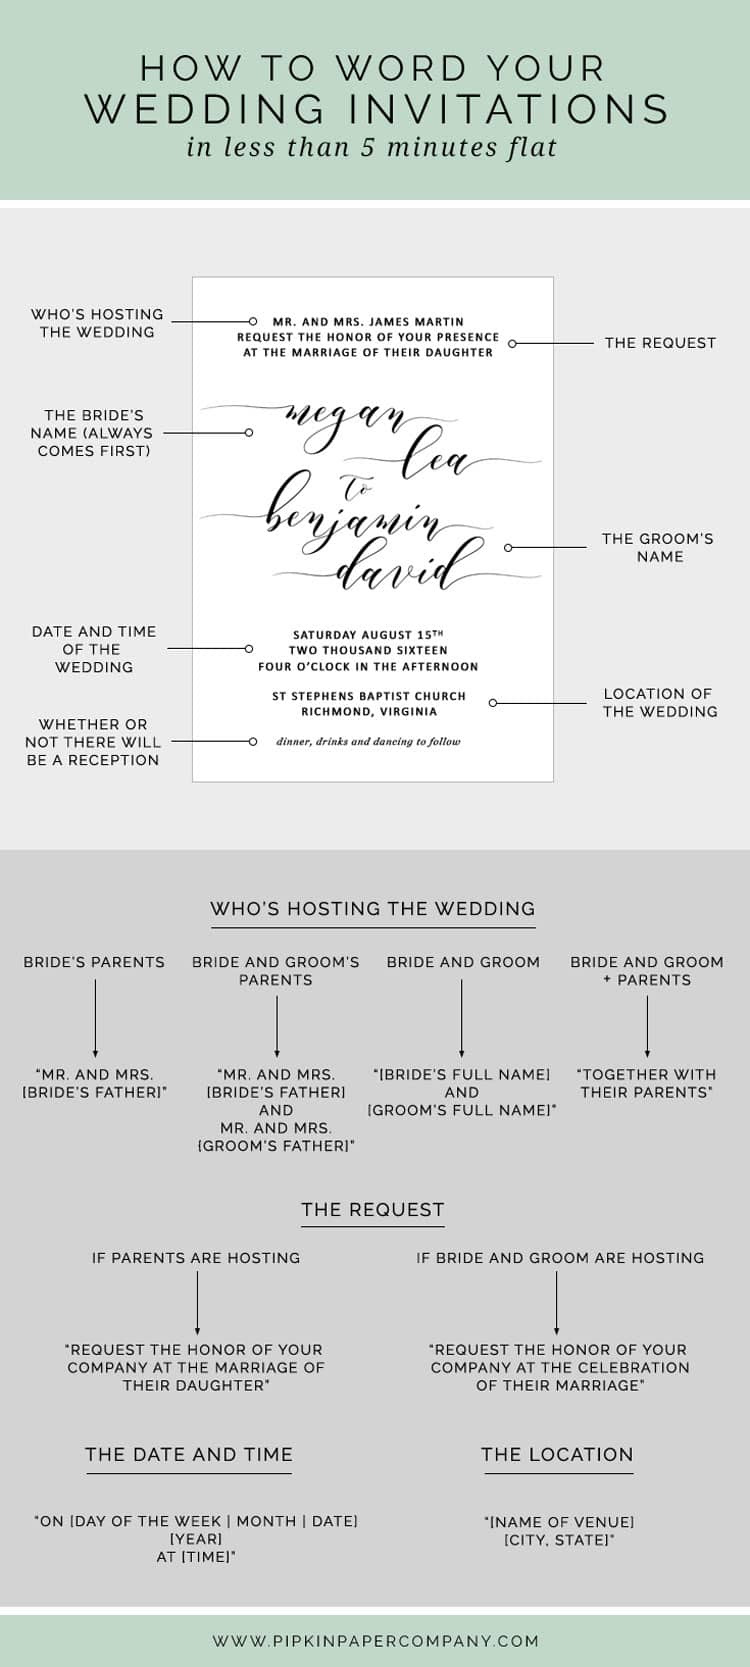 How to Address Guests on Wedding Invitation Envelopes ...